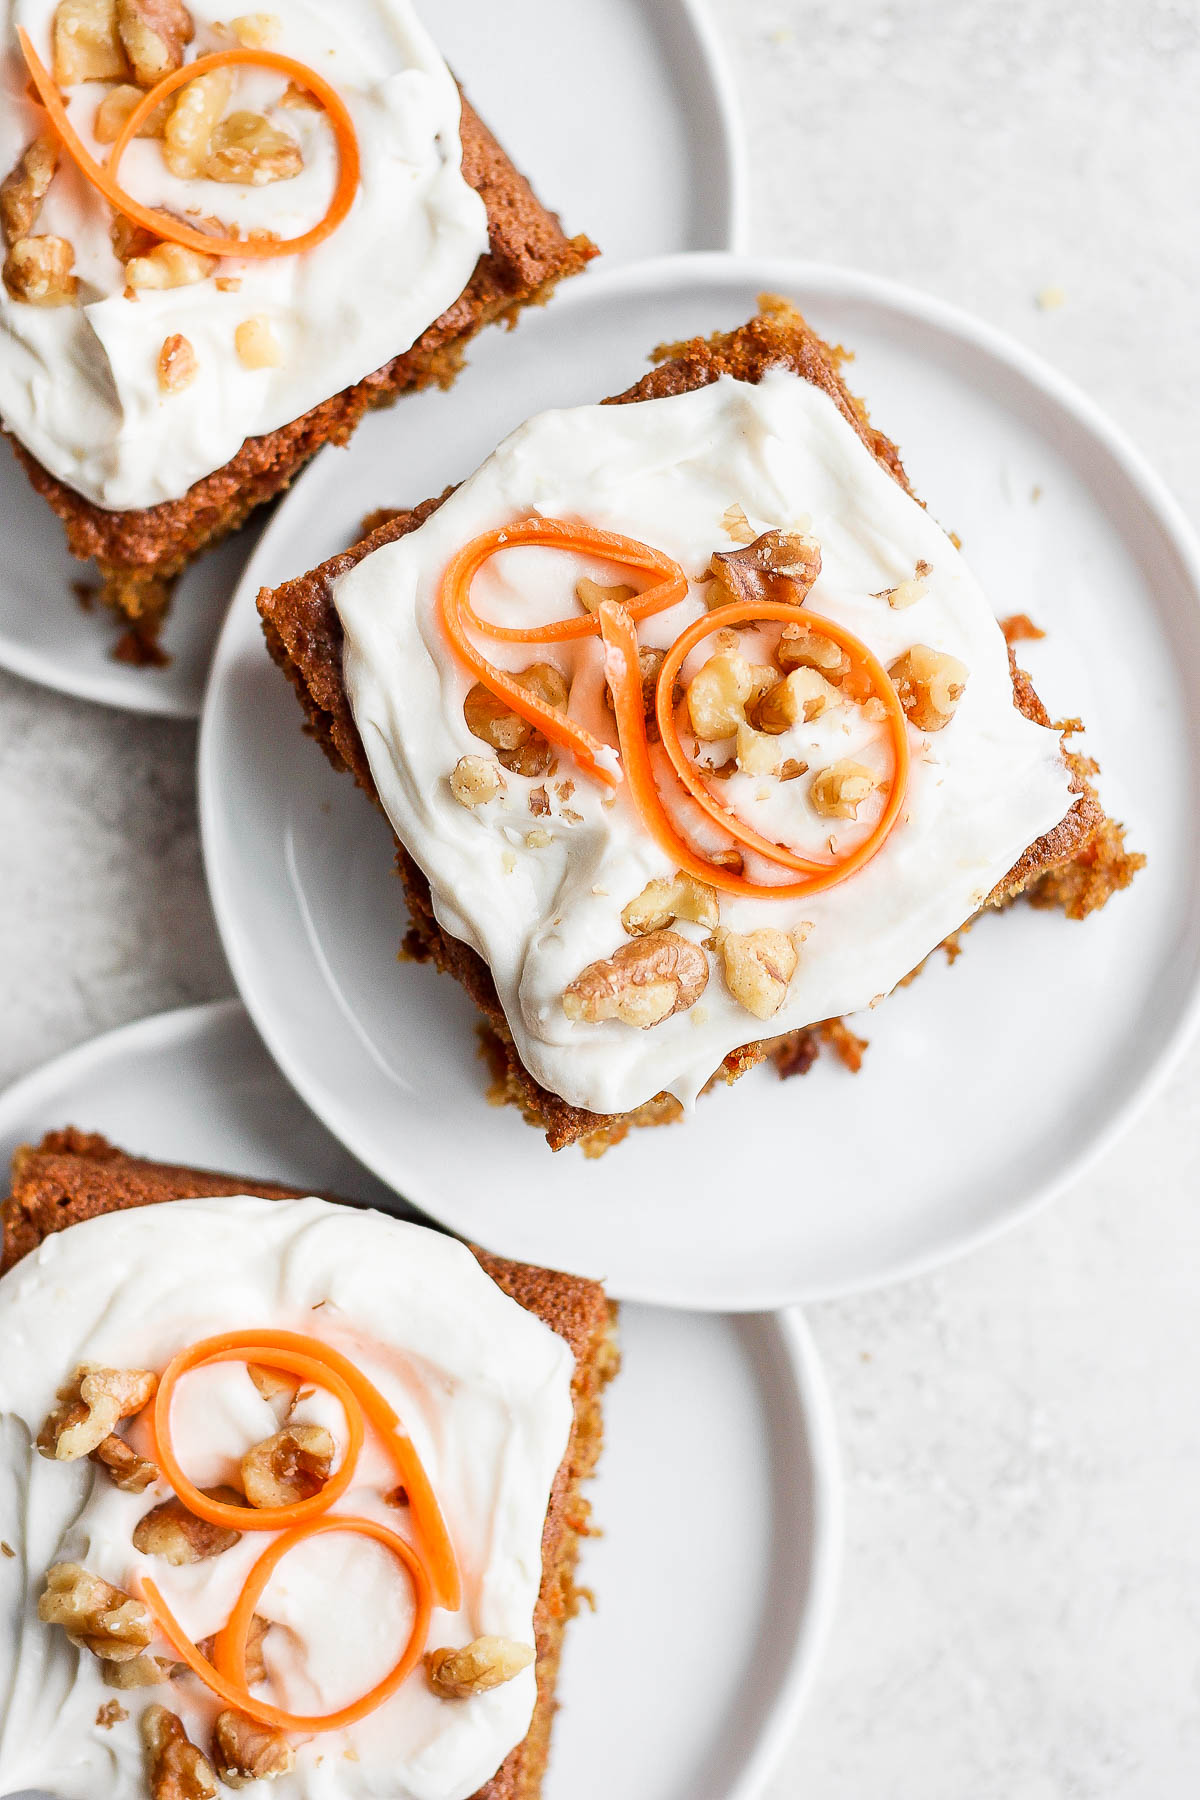 Three slices of gluten free carrot cake on plates.